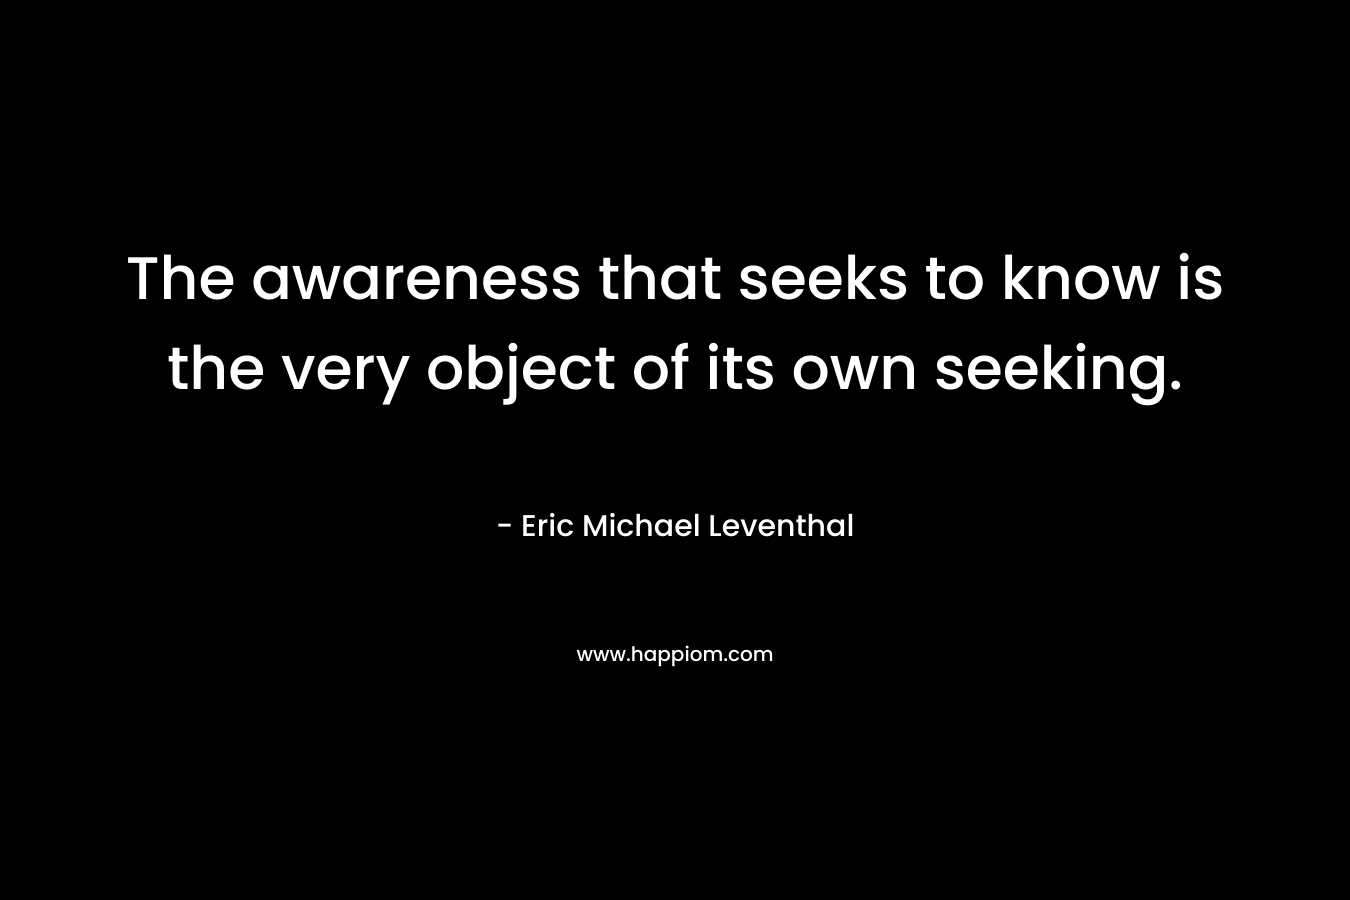 The awareness that seeks to know is the very object of its own seeking.